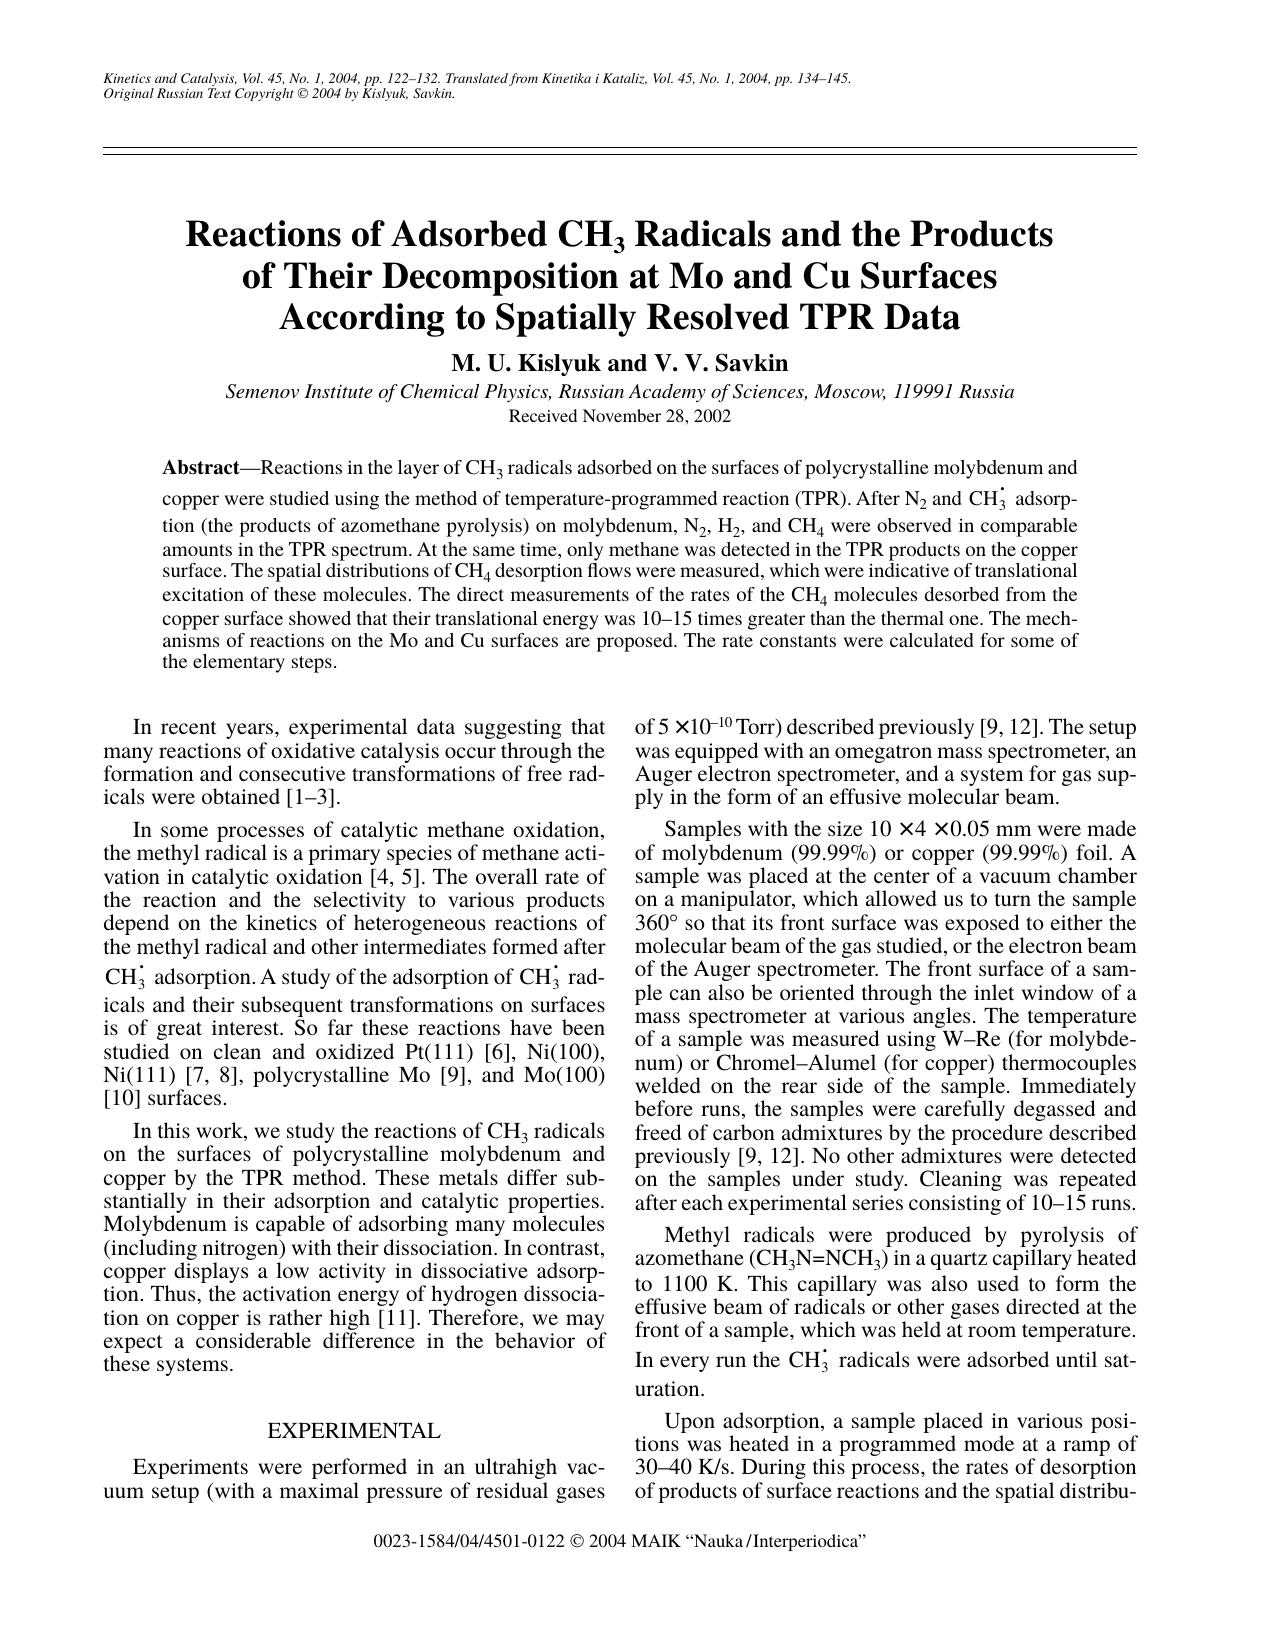 Reactions of Adsorbed CH<Subscript>3<Subscript> Radicals and the Products of Their Decomposition at Mo and Cu Surfaces According to Spatially Resolved TPR Data by Unknown